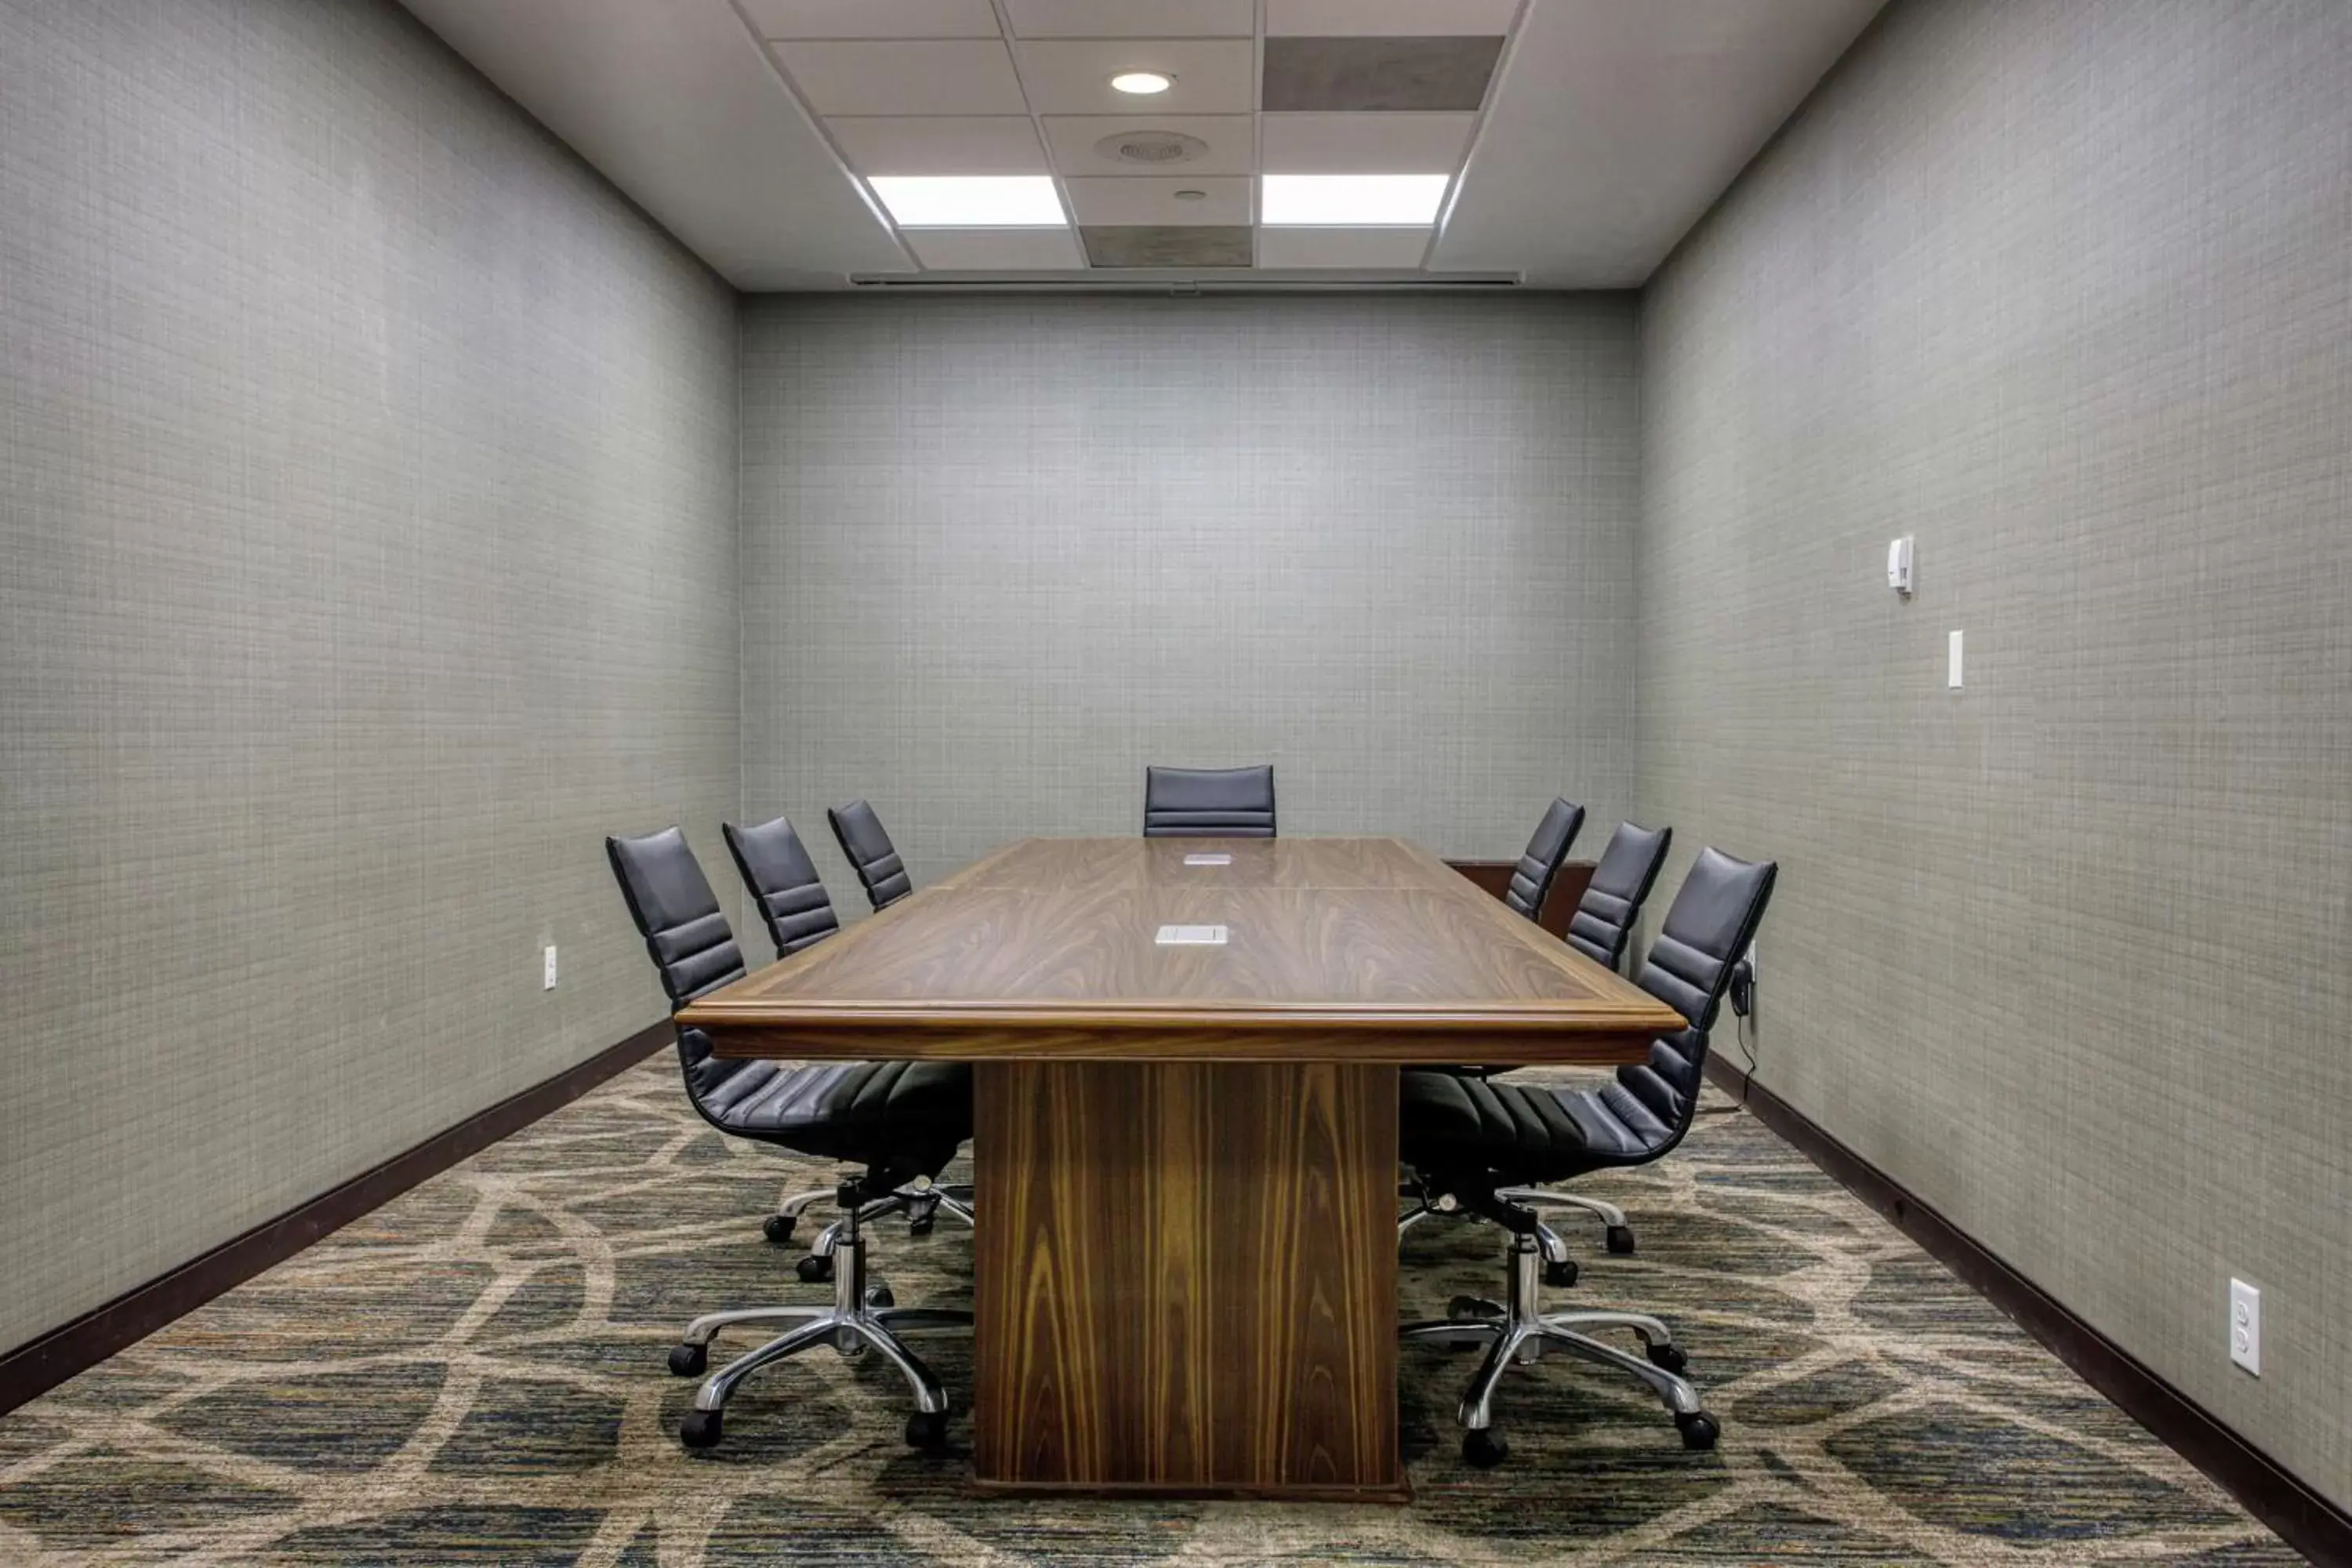 Meeting/conference room in DoubleTree by Hilton Appleton, WI